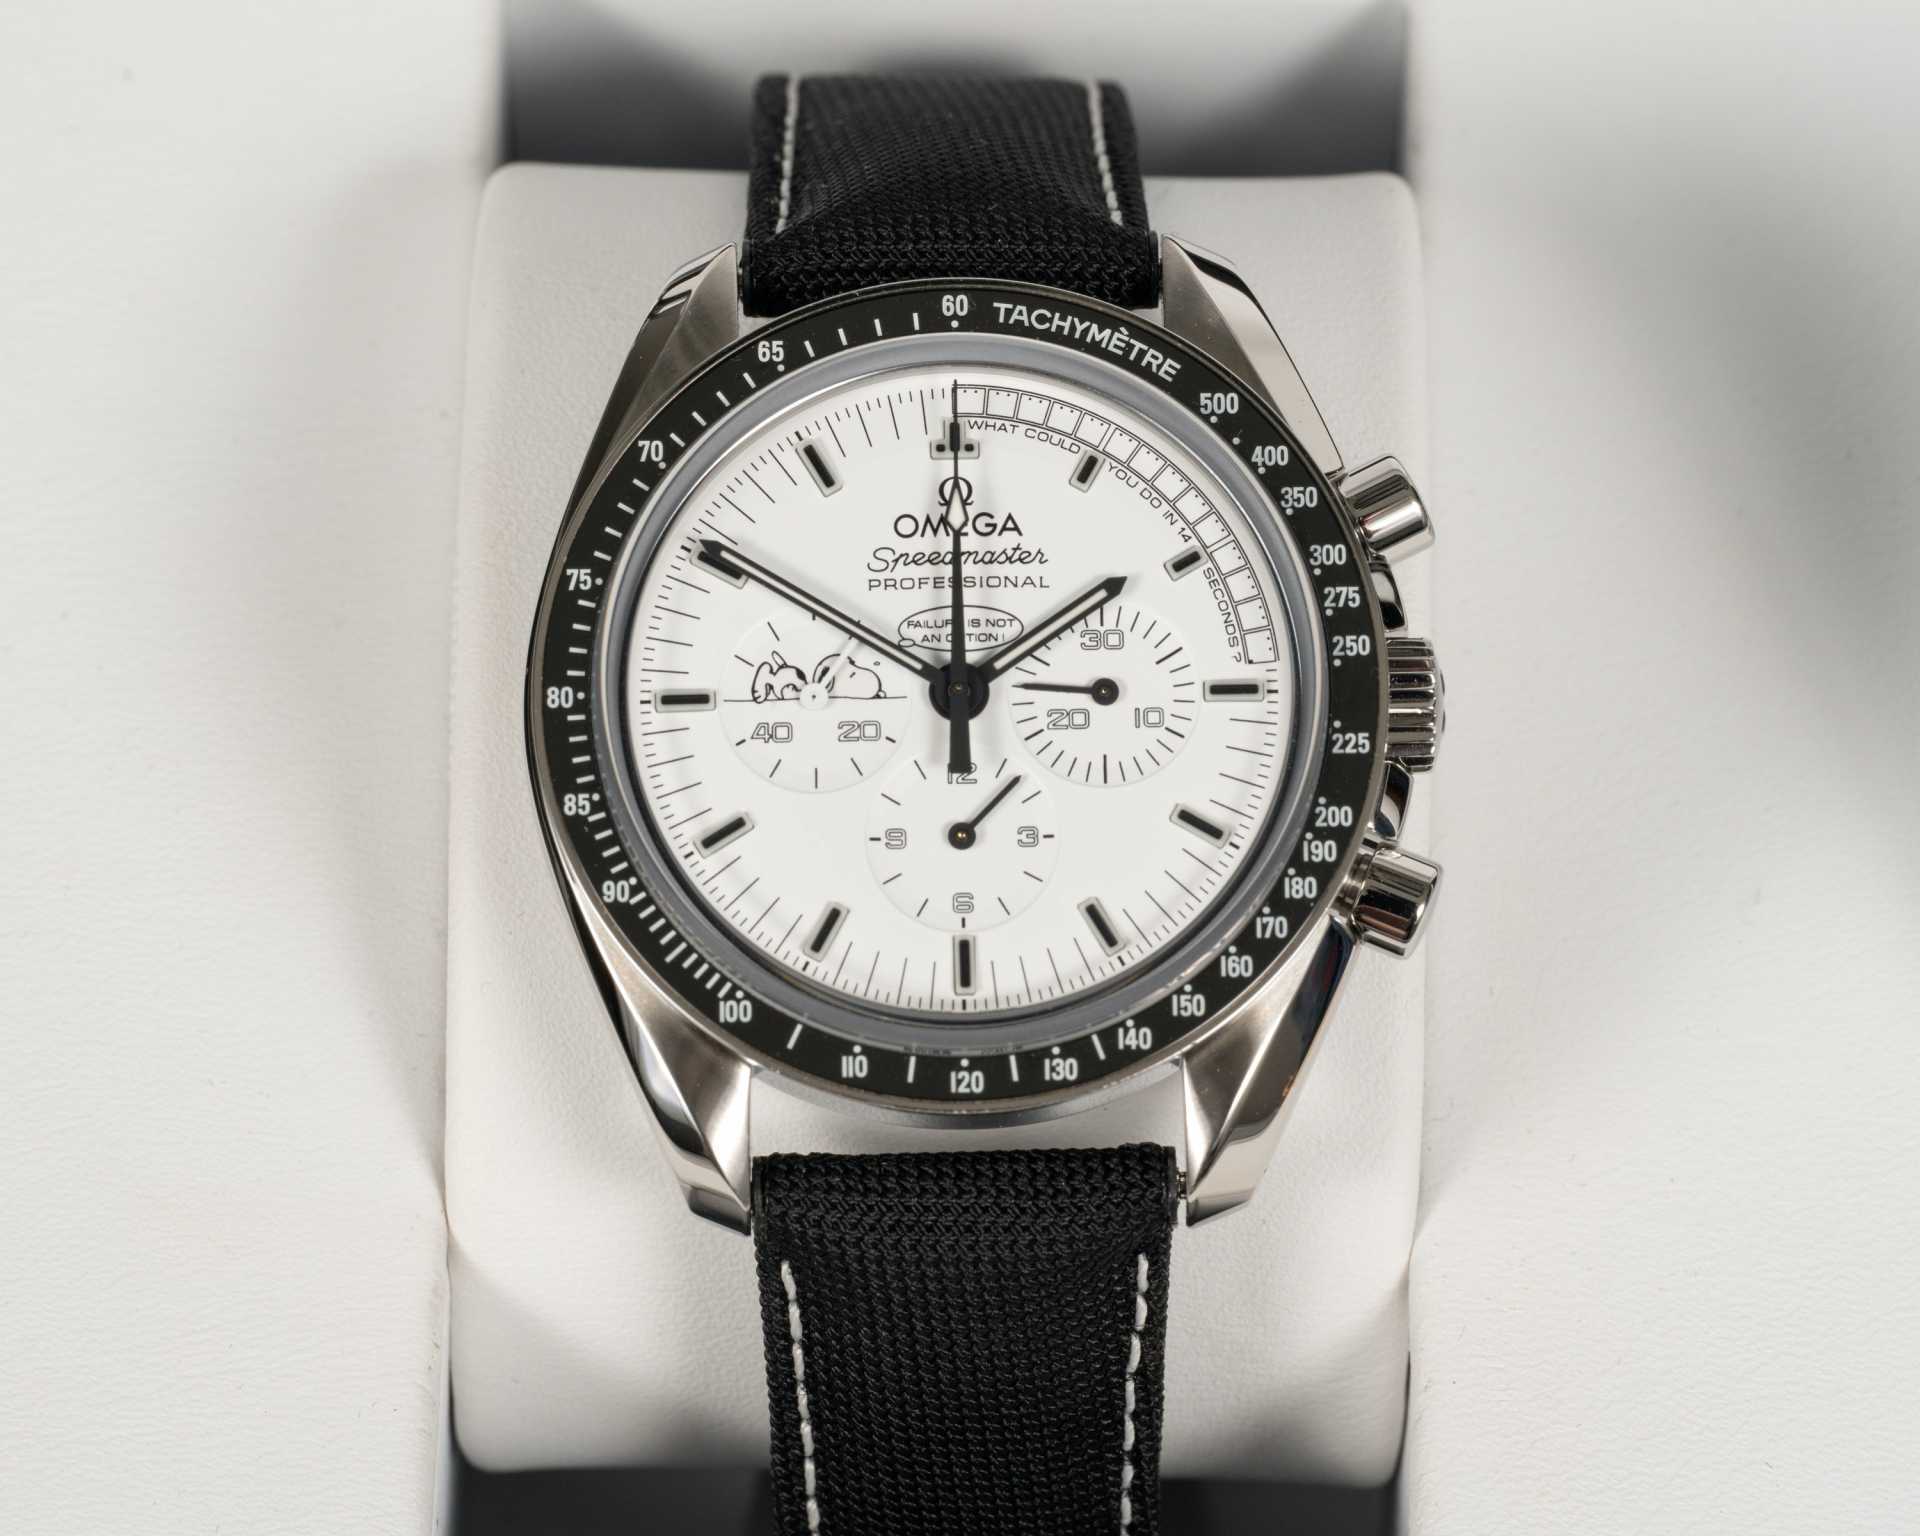 2015 Omega Speedmaster, Apollo 13 anniversary watch. Affectionately known as the Omega ‘Snoopy’.